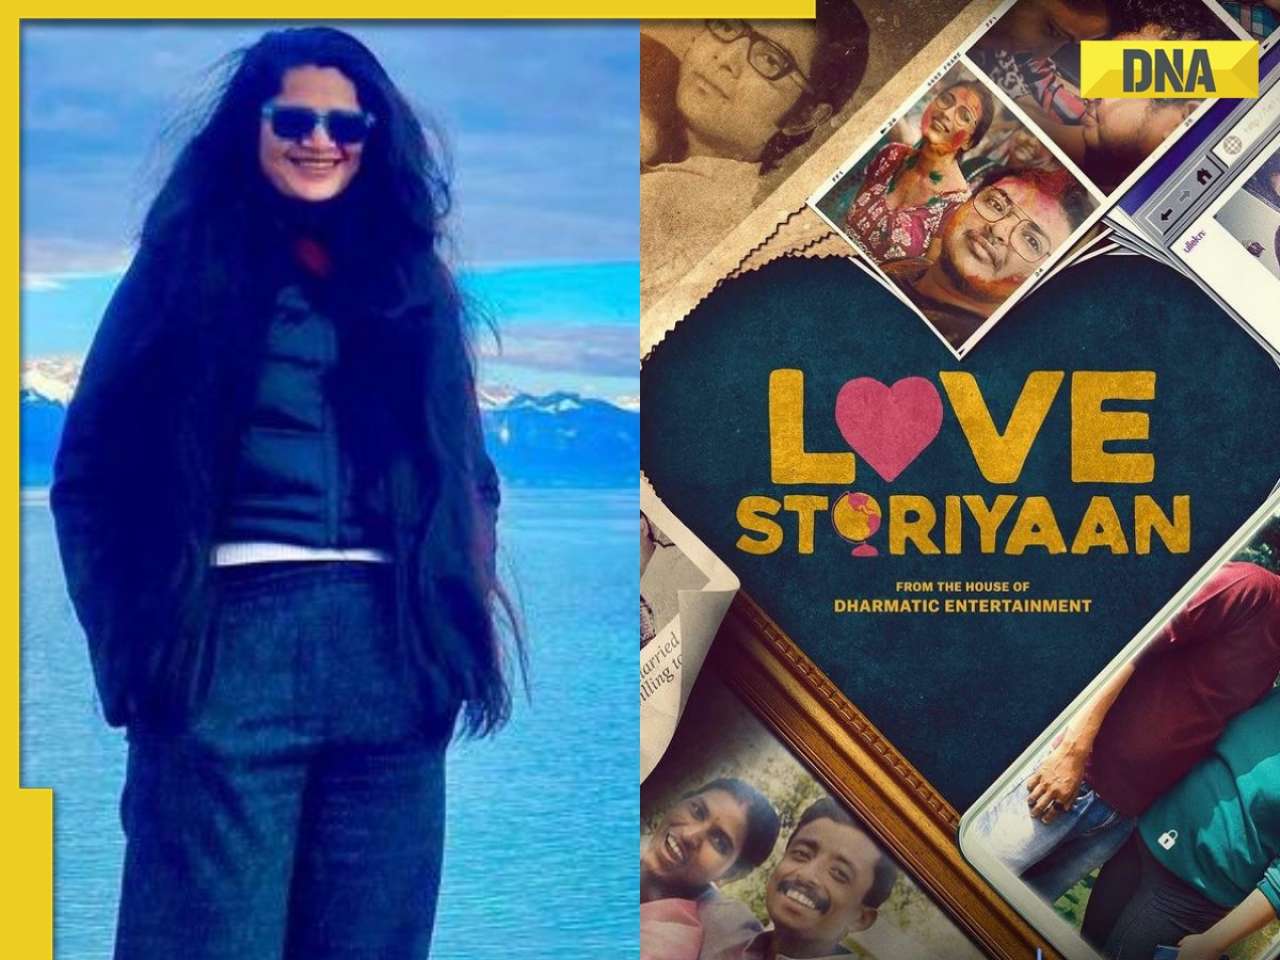 Love Storiyaan director Archana Phadke on making love stories beyond violence, sex: 'This is what SRK...' | Exclusive